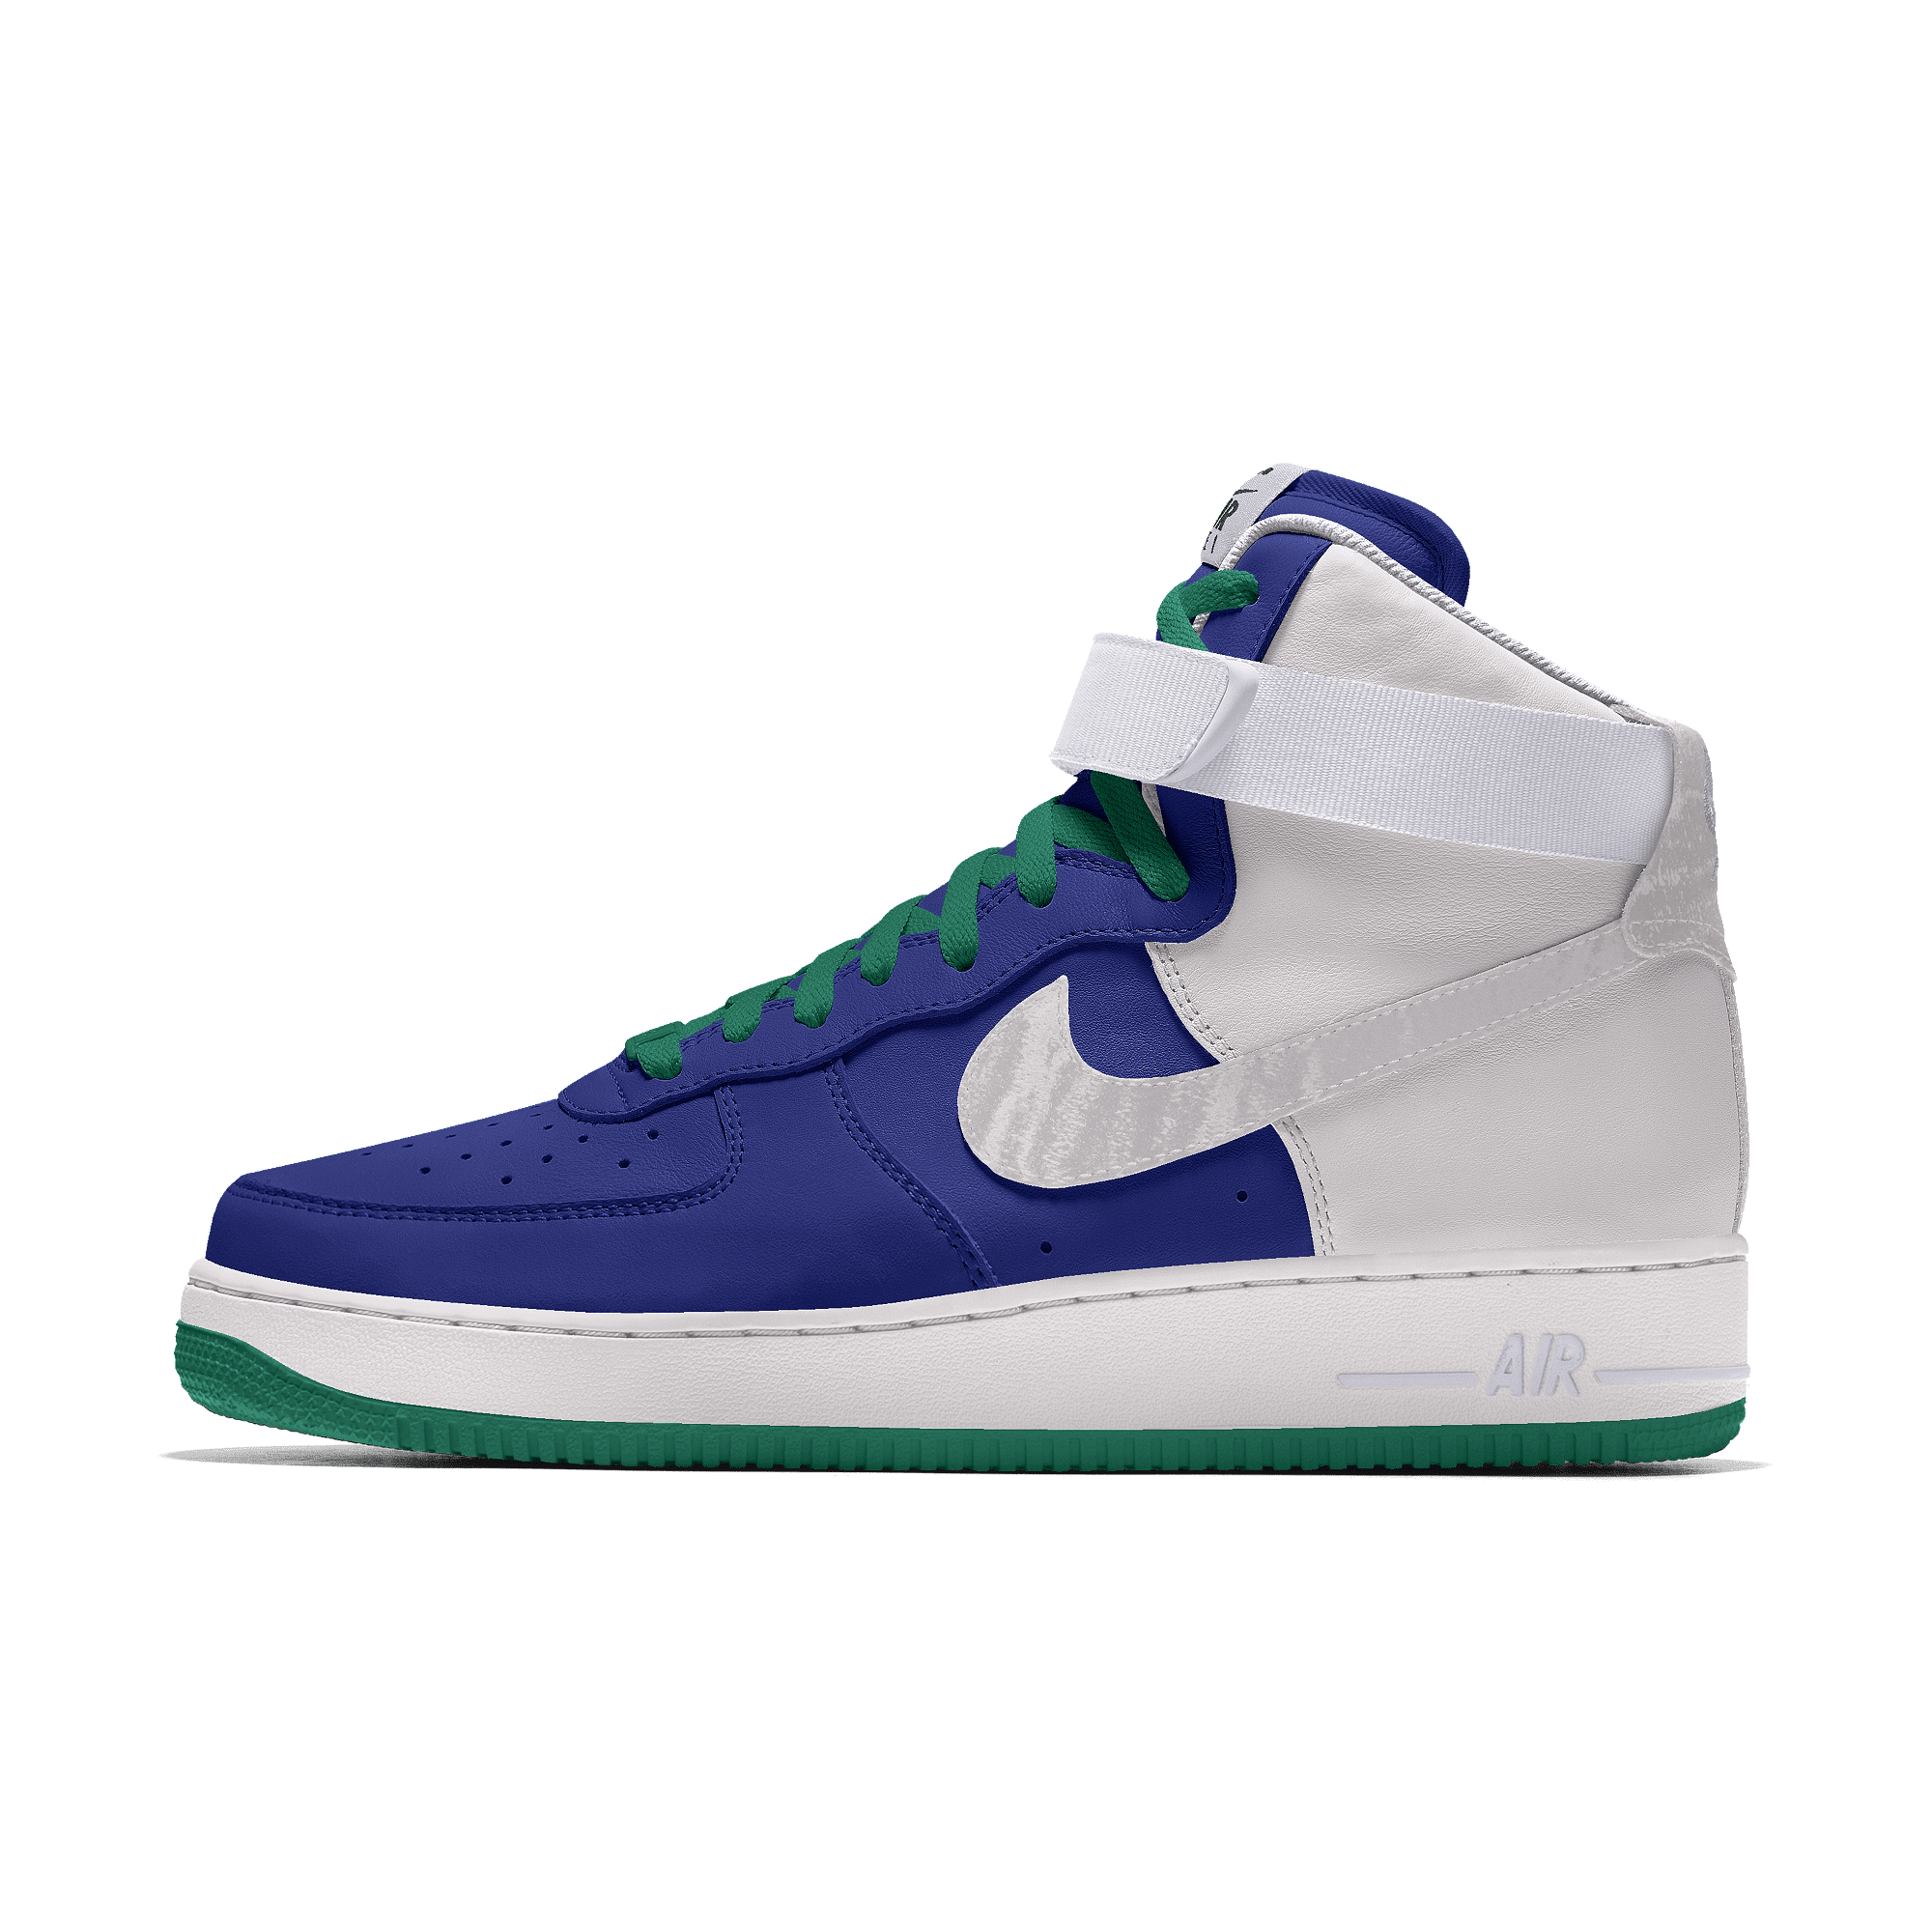 Scarpa personalizzabile Nike Air Force 1 High By You – Donna - Blu